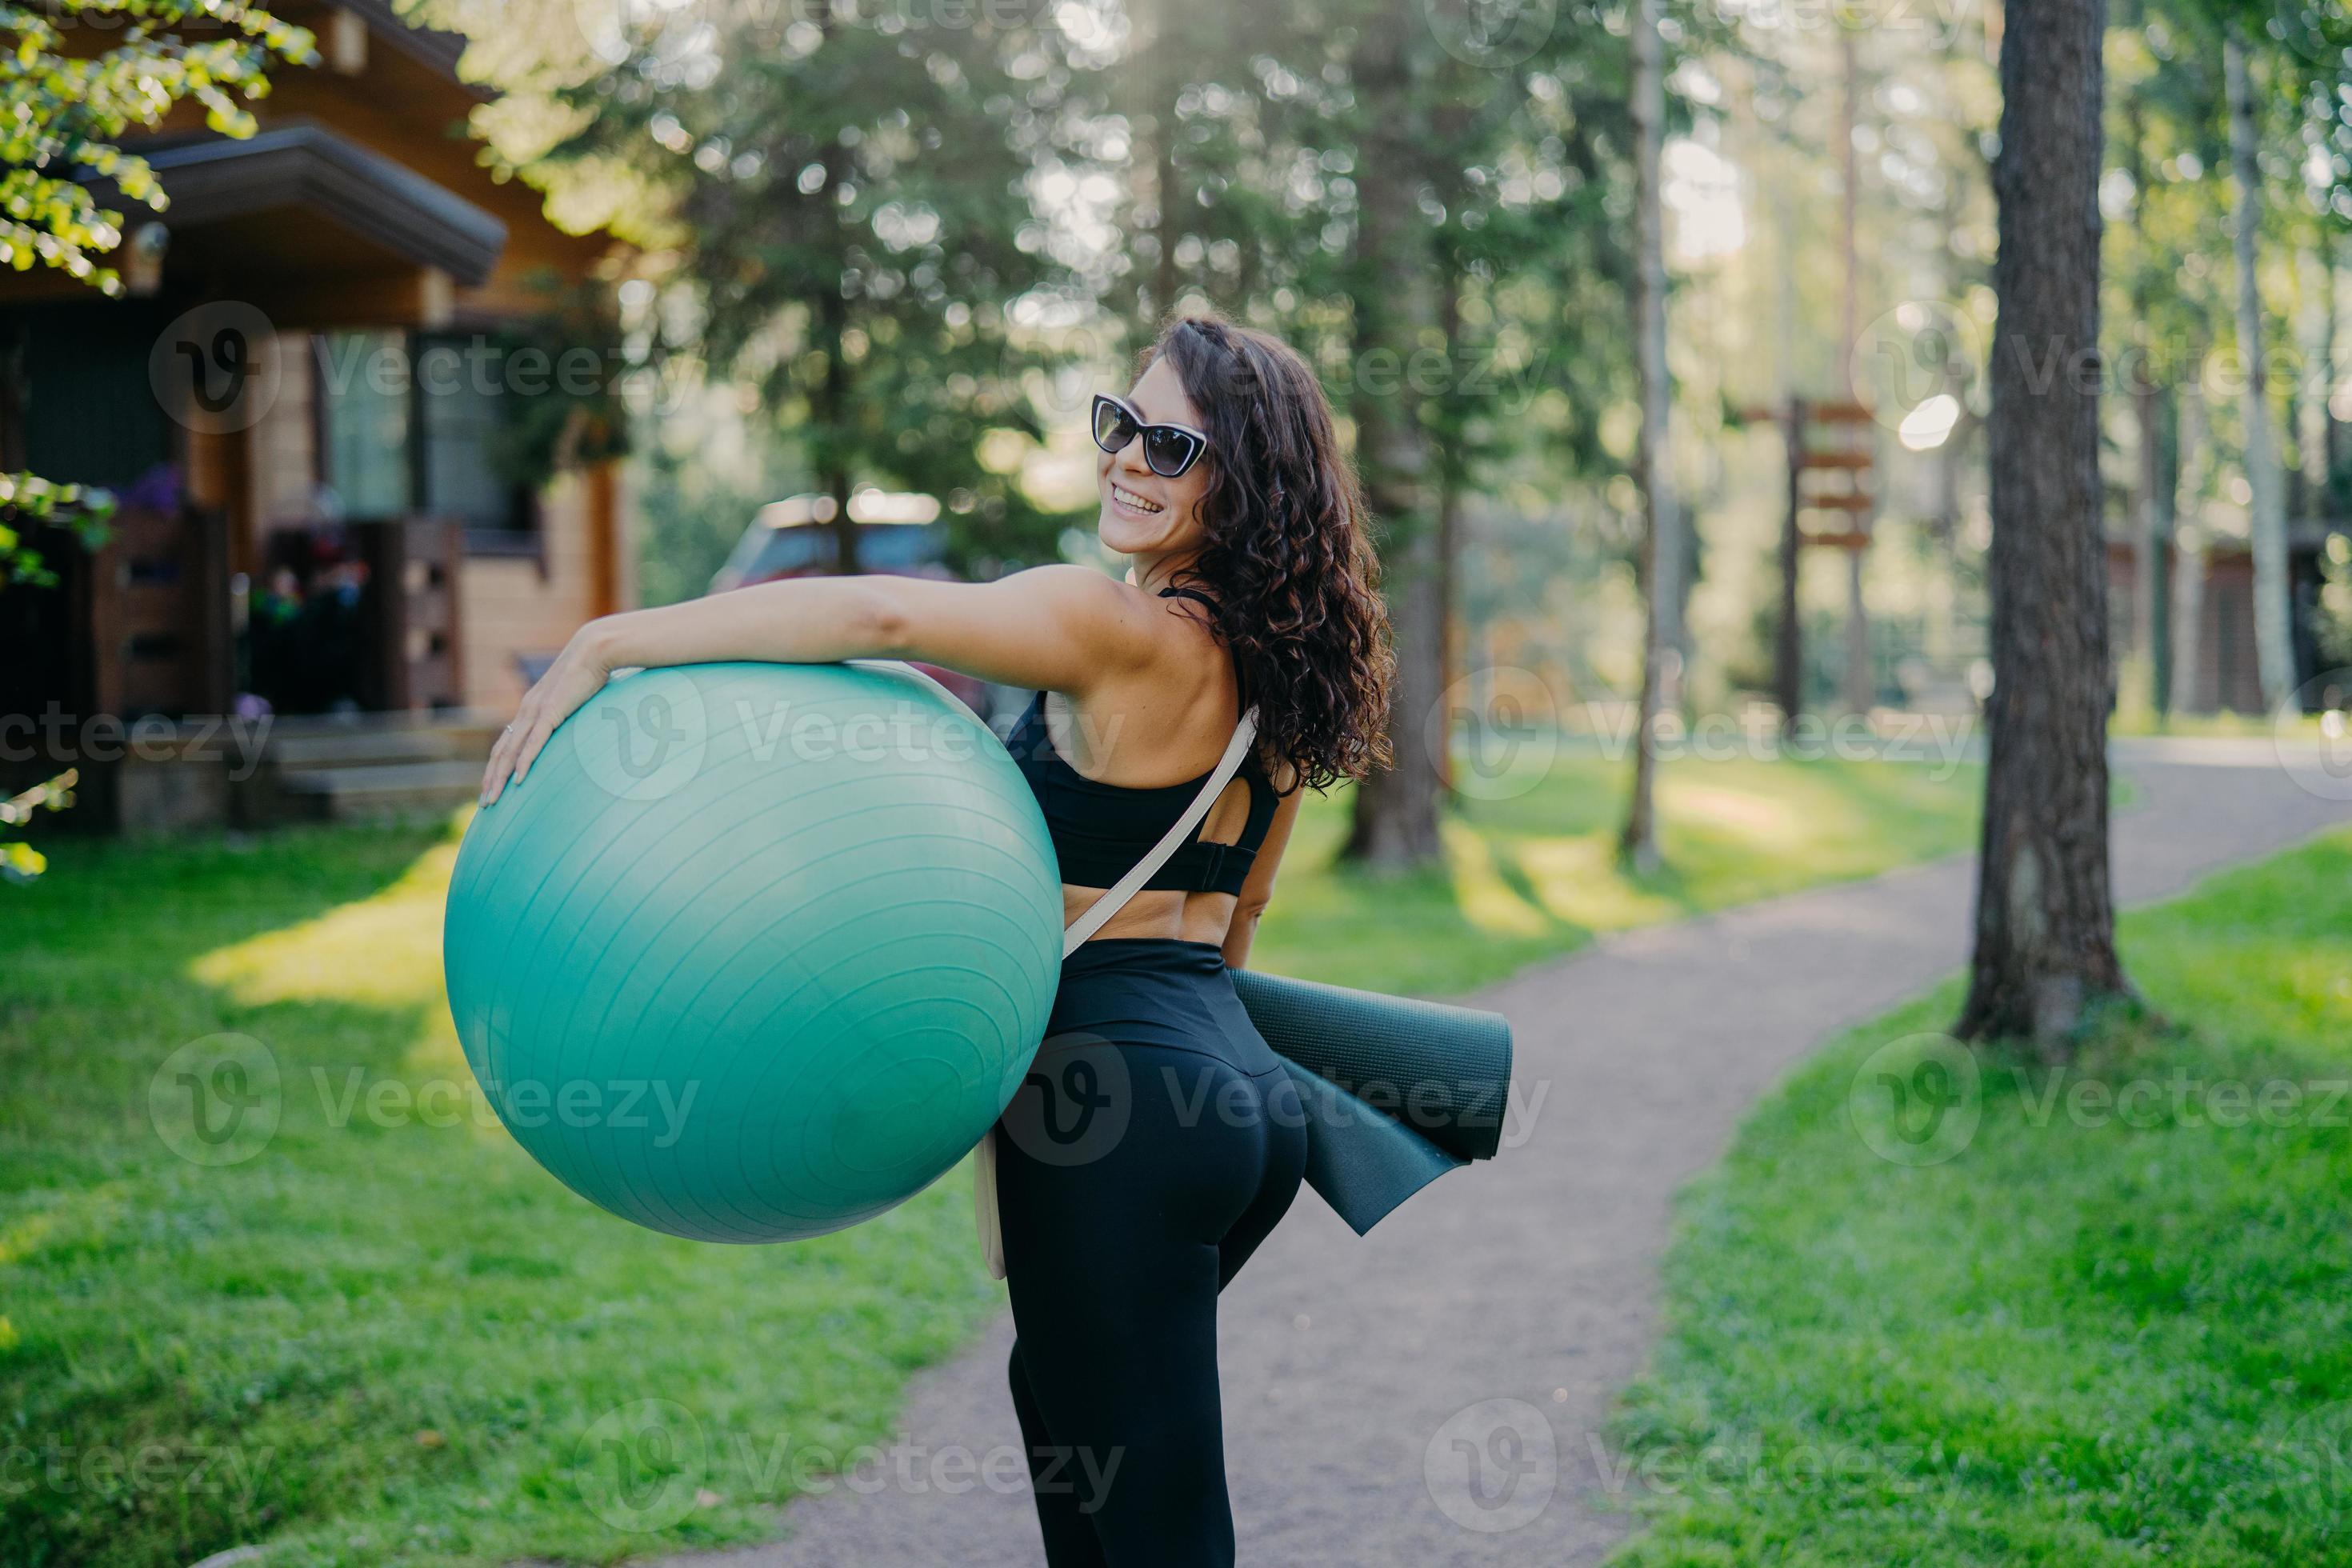 https://static.vecteezy.com/ti/photos-gratuite/p2/10359332-sport-et-loisirs-concept-cheerful-slim-woman-in-cropped-top-and-leggings-porte-gymnastique-ball-and-rolled-up-karemat-poses-outdoor-pres-forest-leads-healthy-lifestyle-a-une-formation-reguliere-photo.JPG